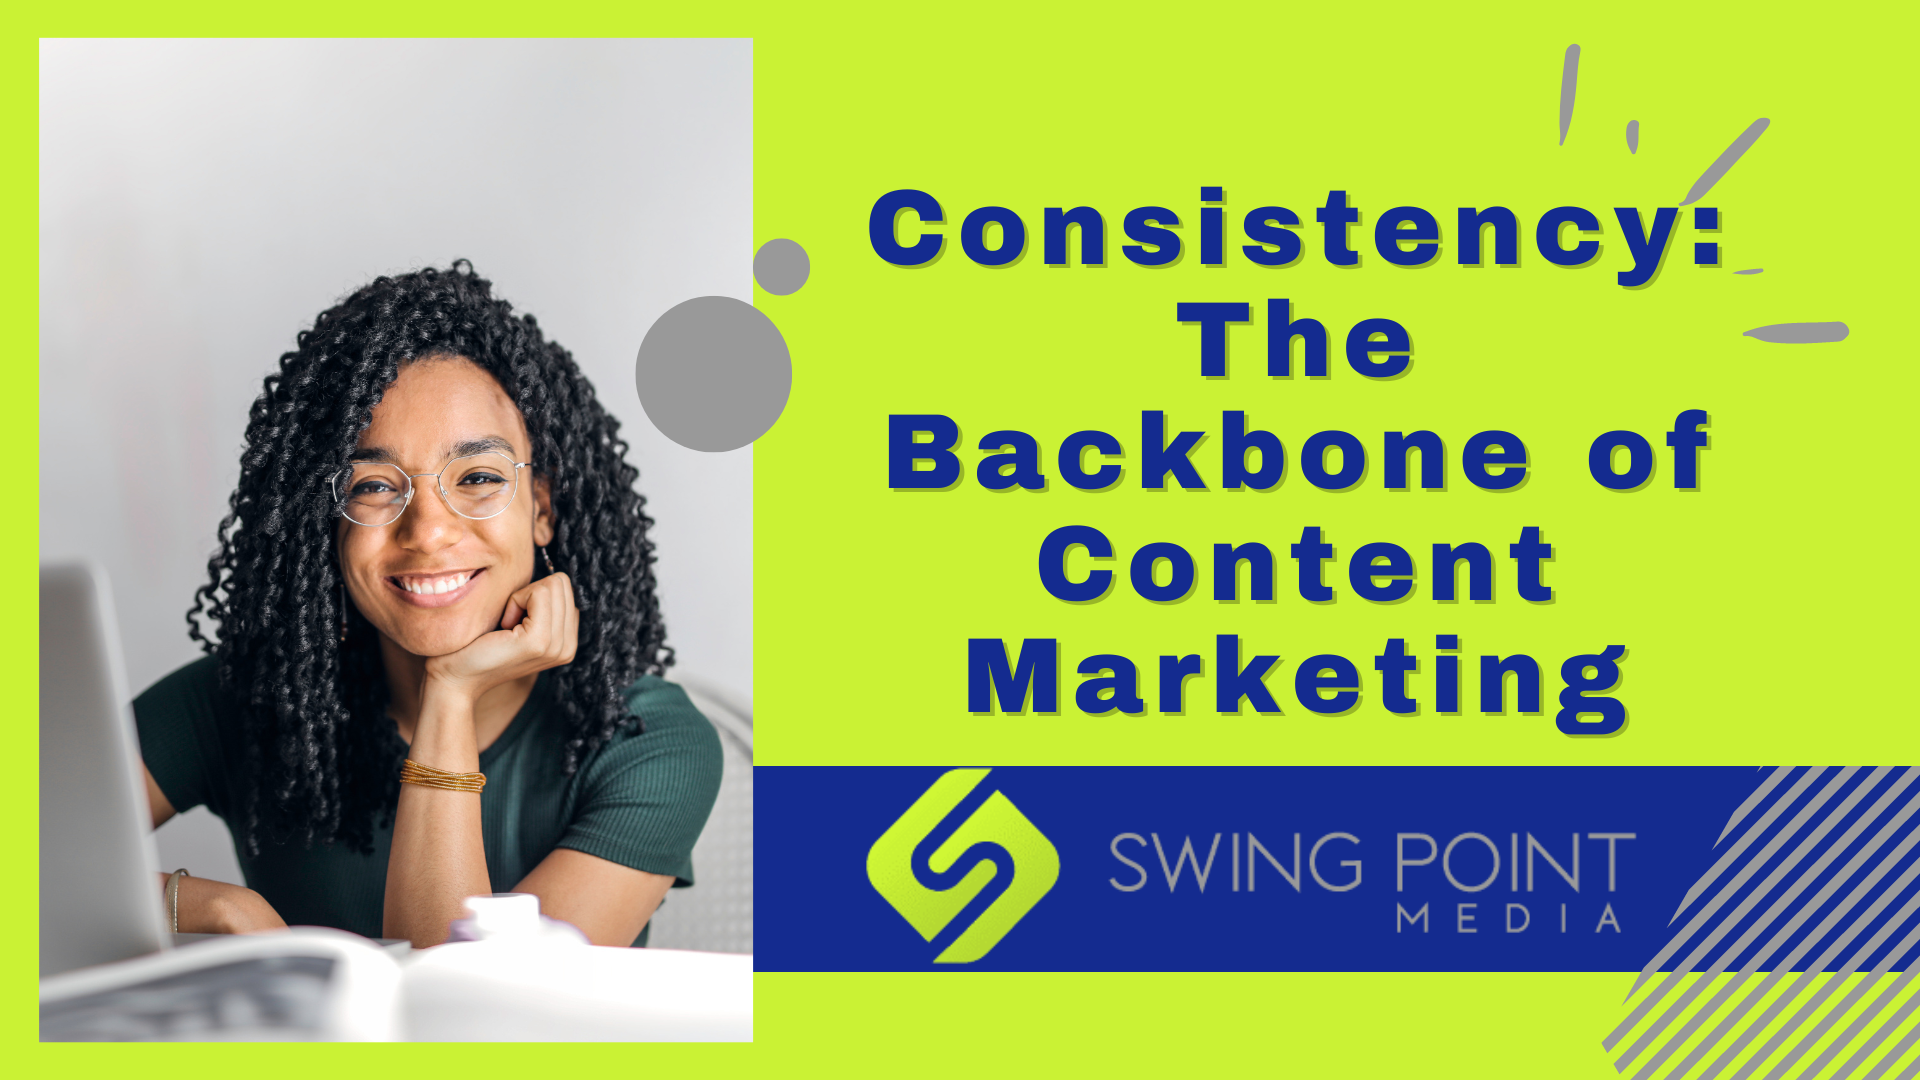 Consistency: The Backbone of Content Marketing